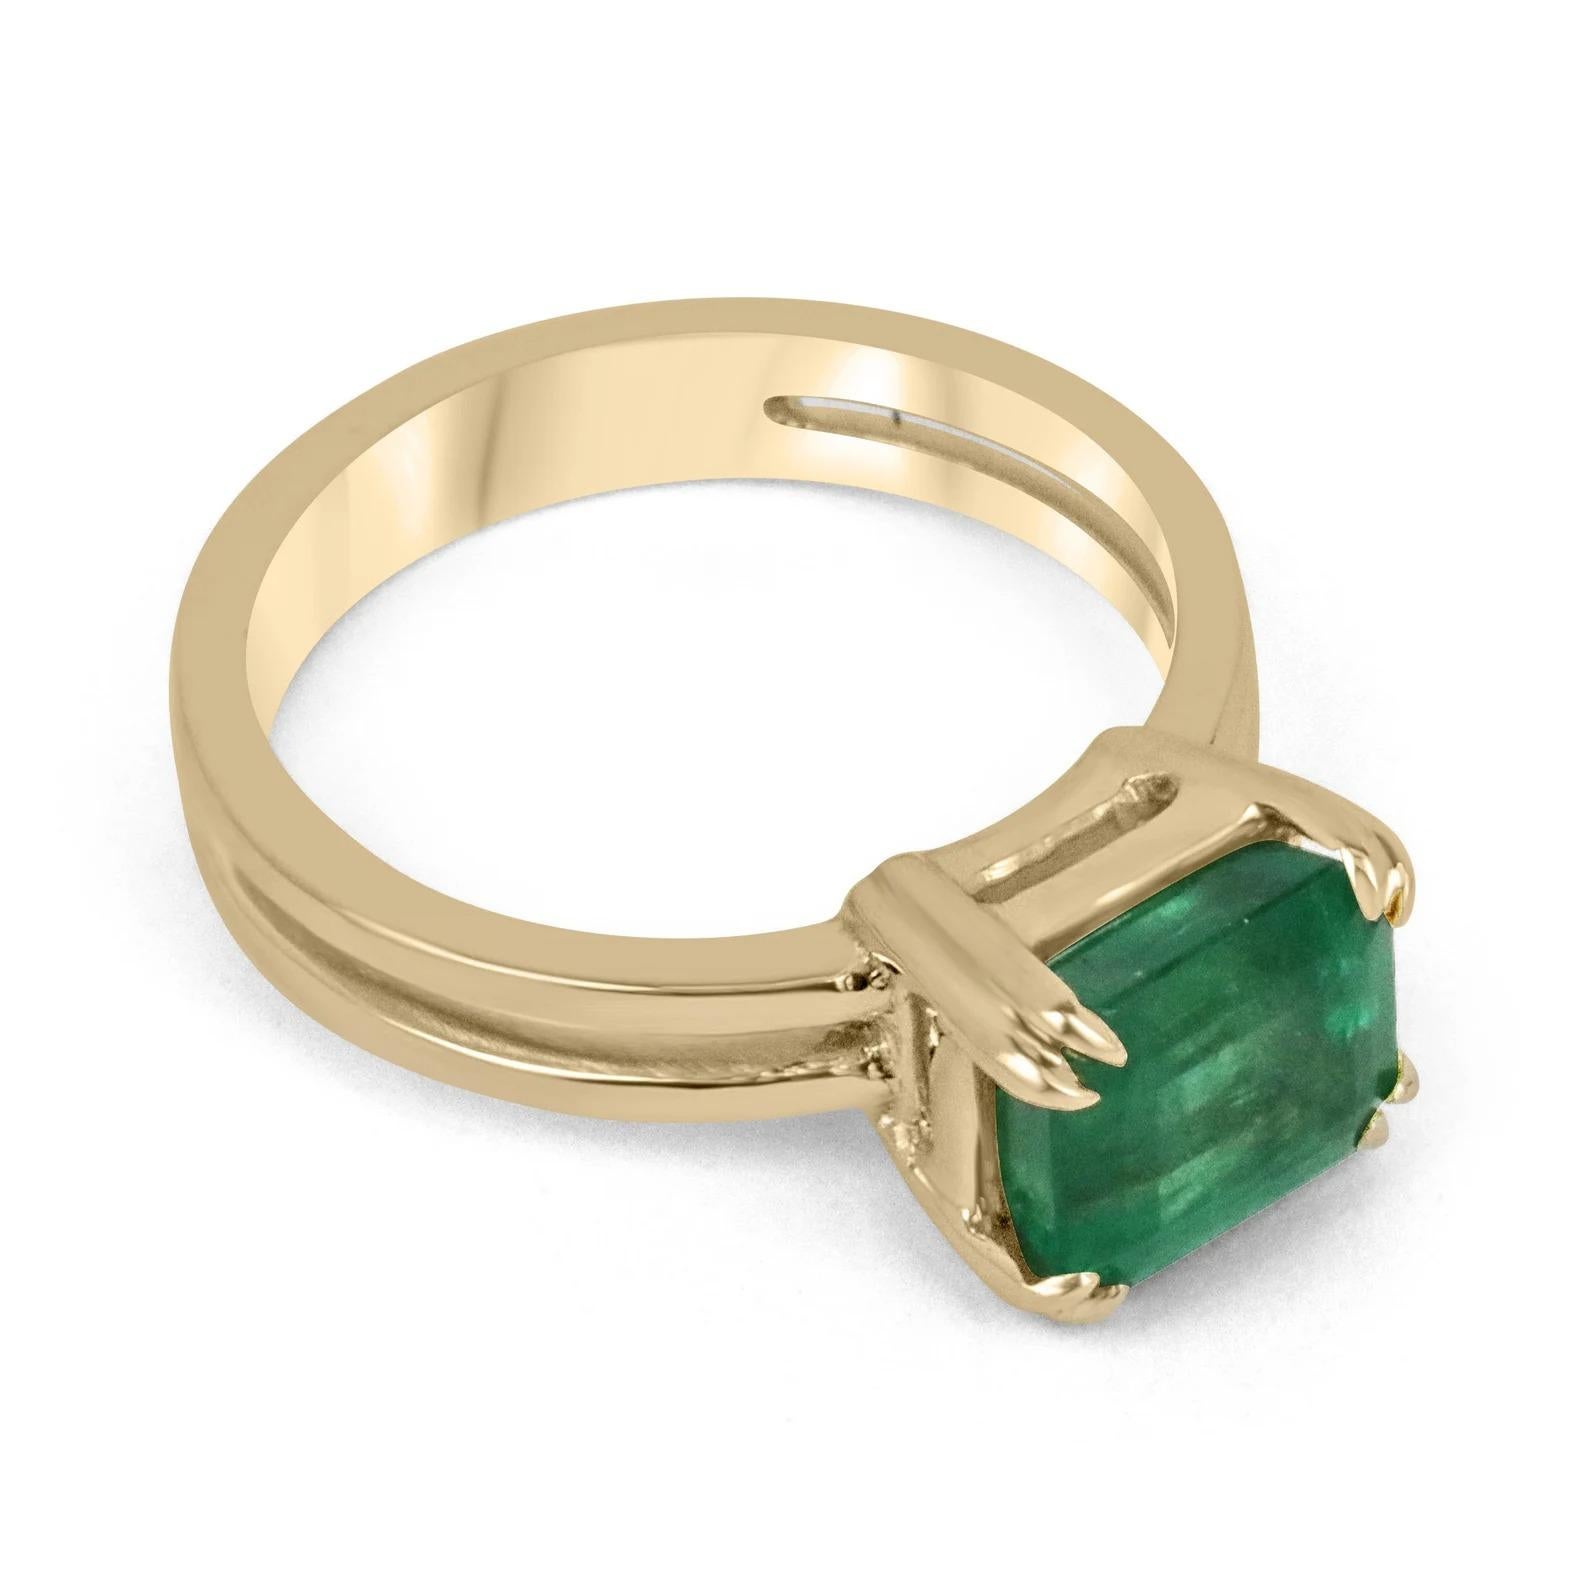 Displayed is a stunning East-to-West emerald solitaire engagement or right-hand ring in 18K yellow gold. This gorgeous solitaire ring carries a 2.68-carat emerald in a double-prong setting. Fully faceted, this gemstone showcases excellent shine and